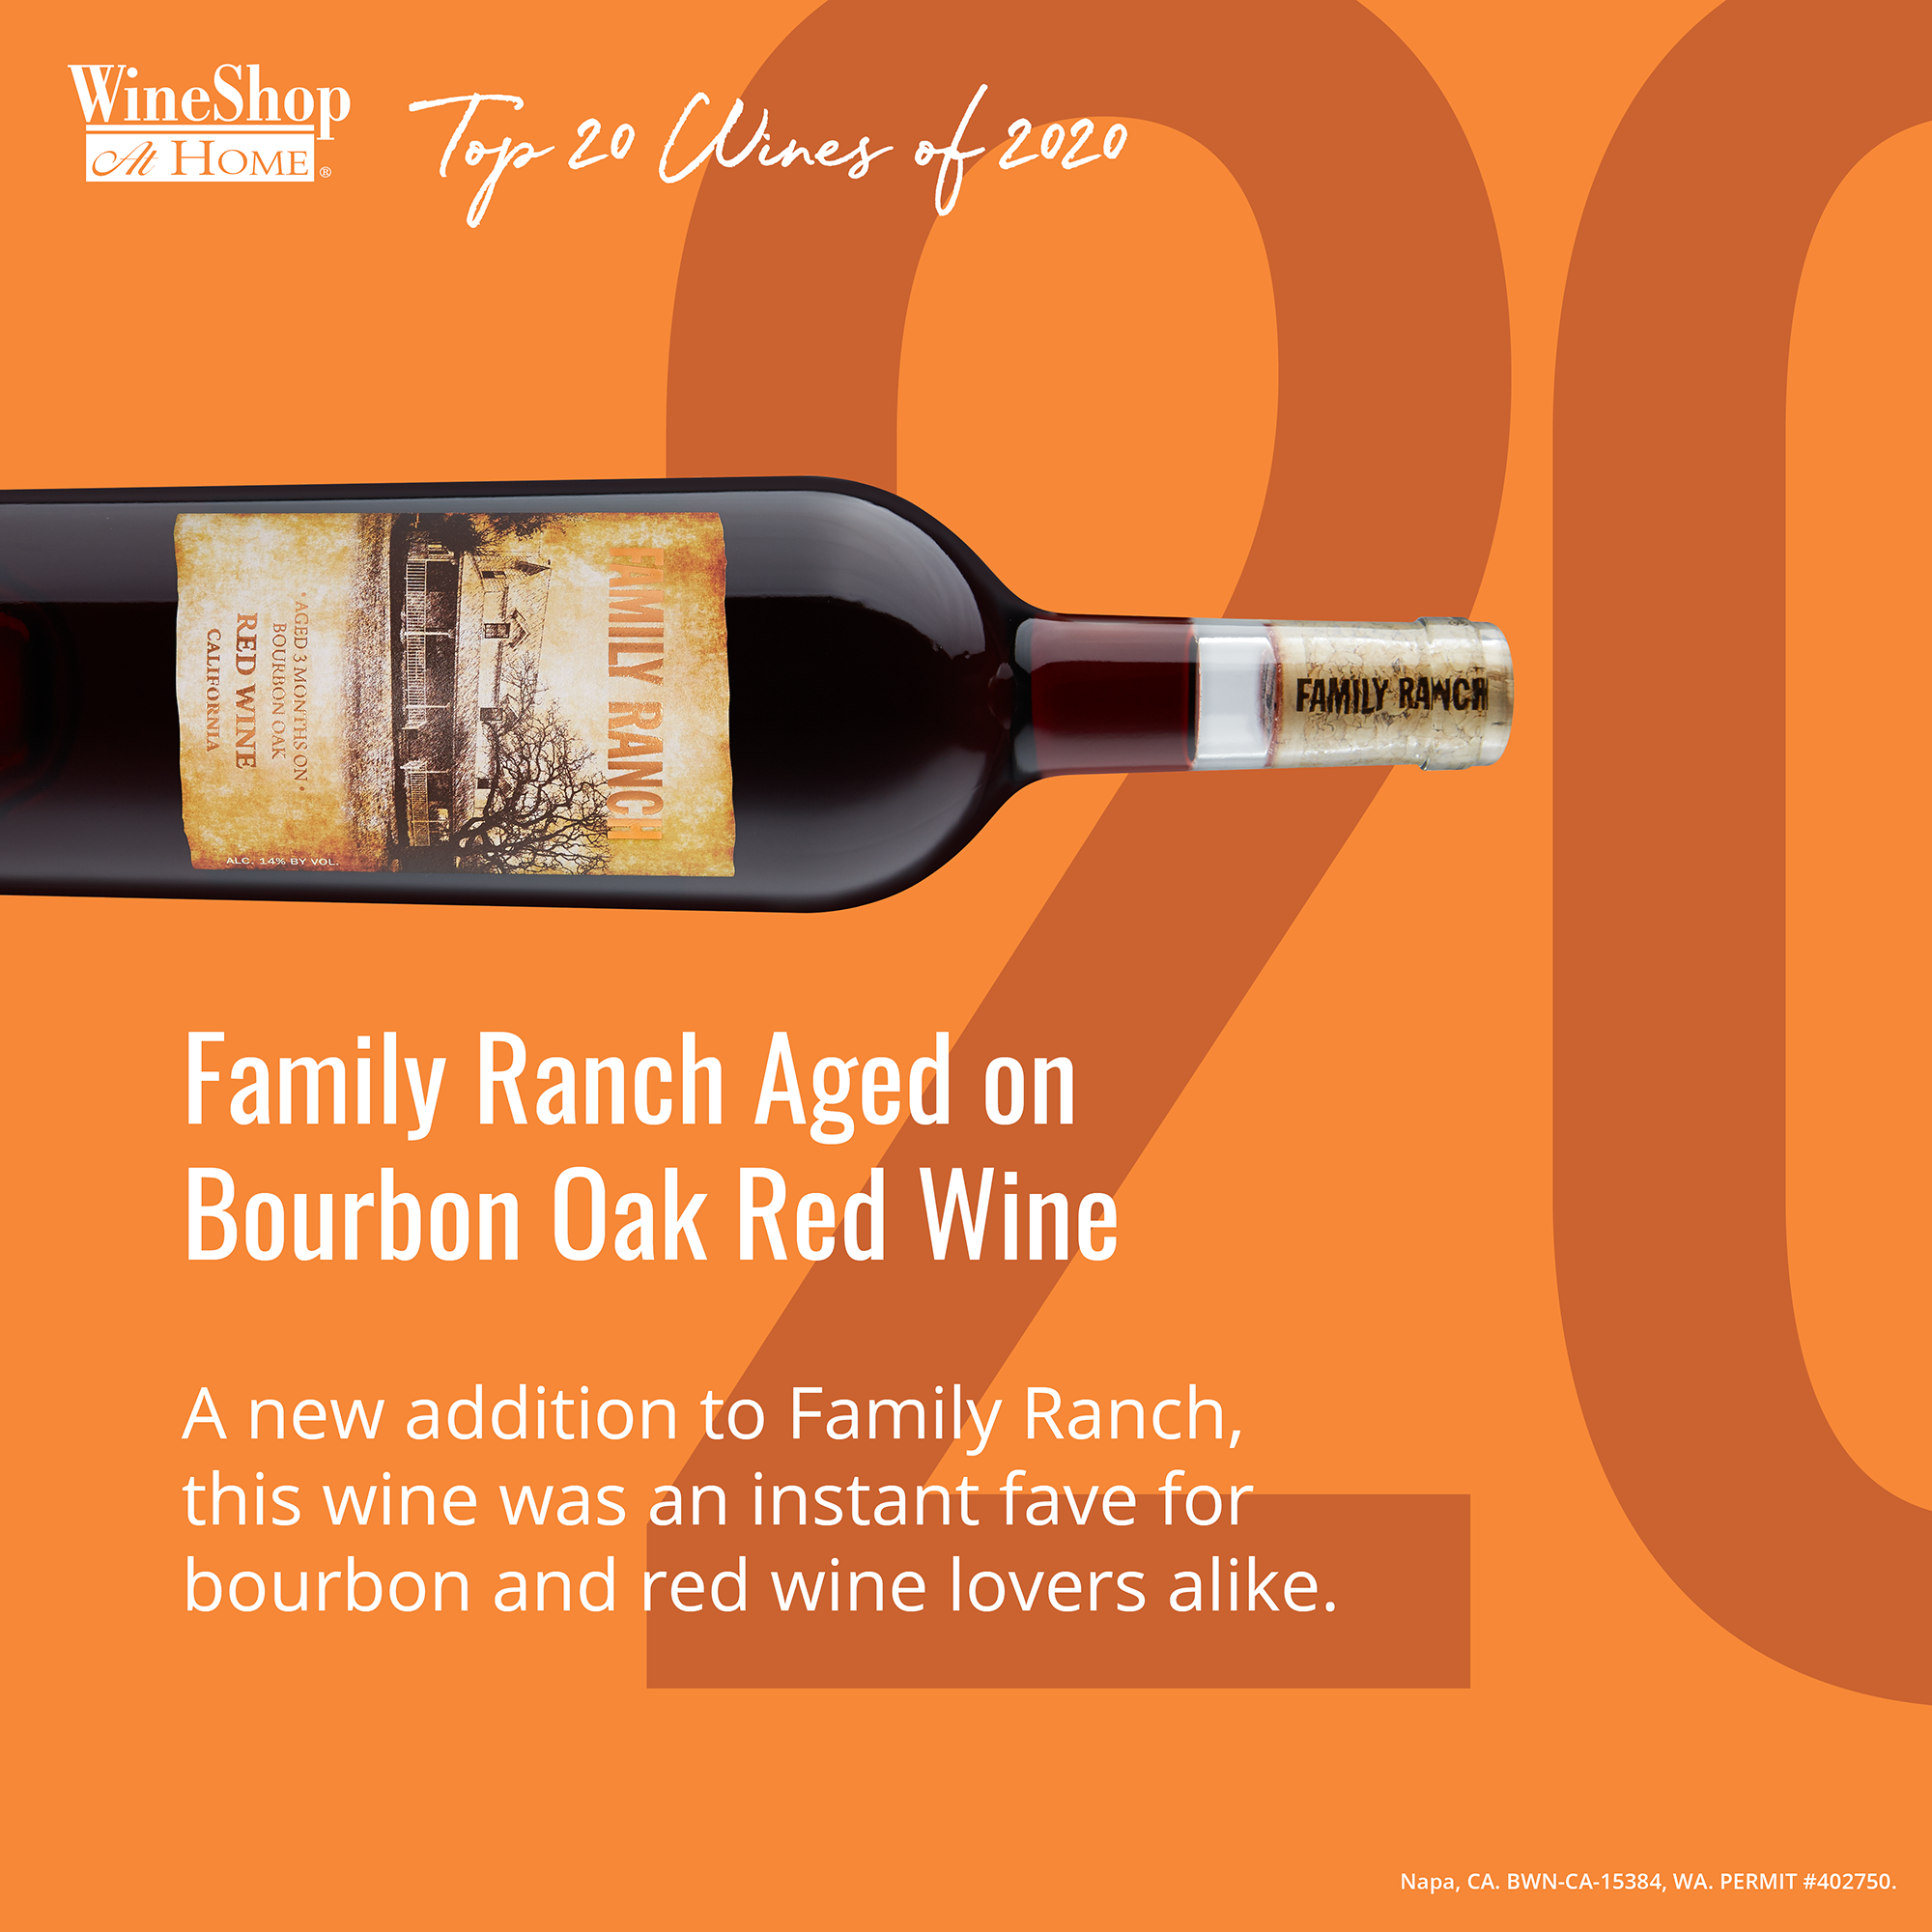 Family Ranch Aged on Bourbon Oak Red Wine